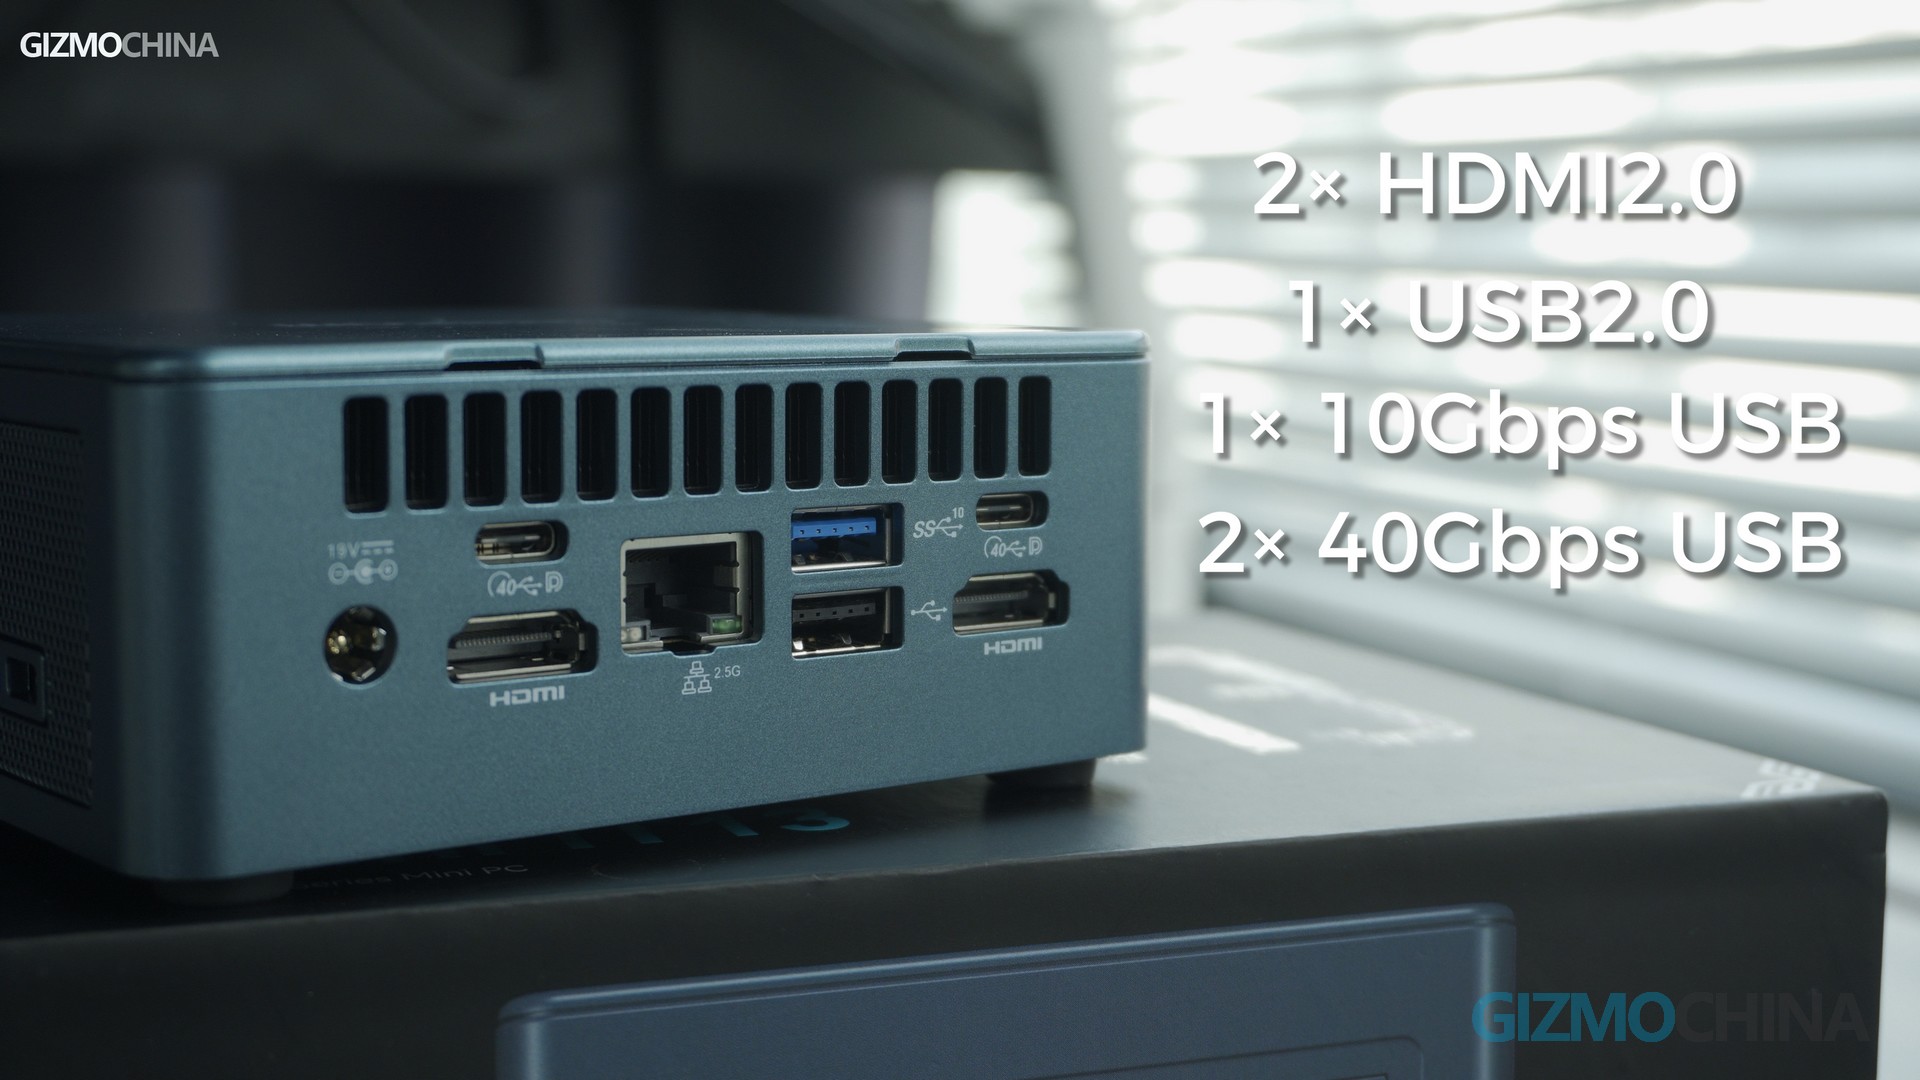 GEEKOM Mini IT13 PC Review - The fastest Mini PC we've tested